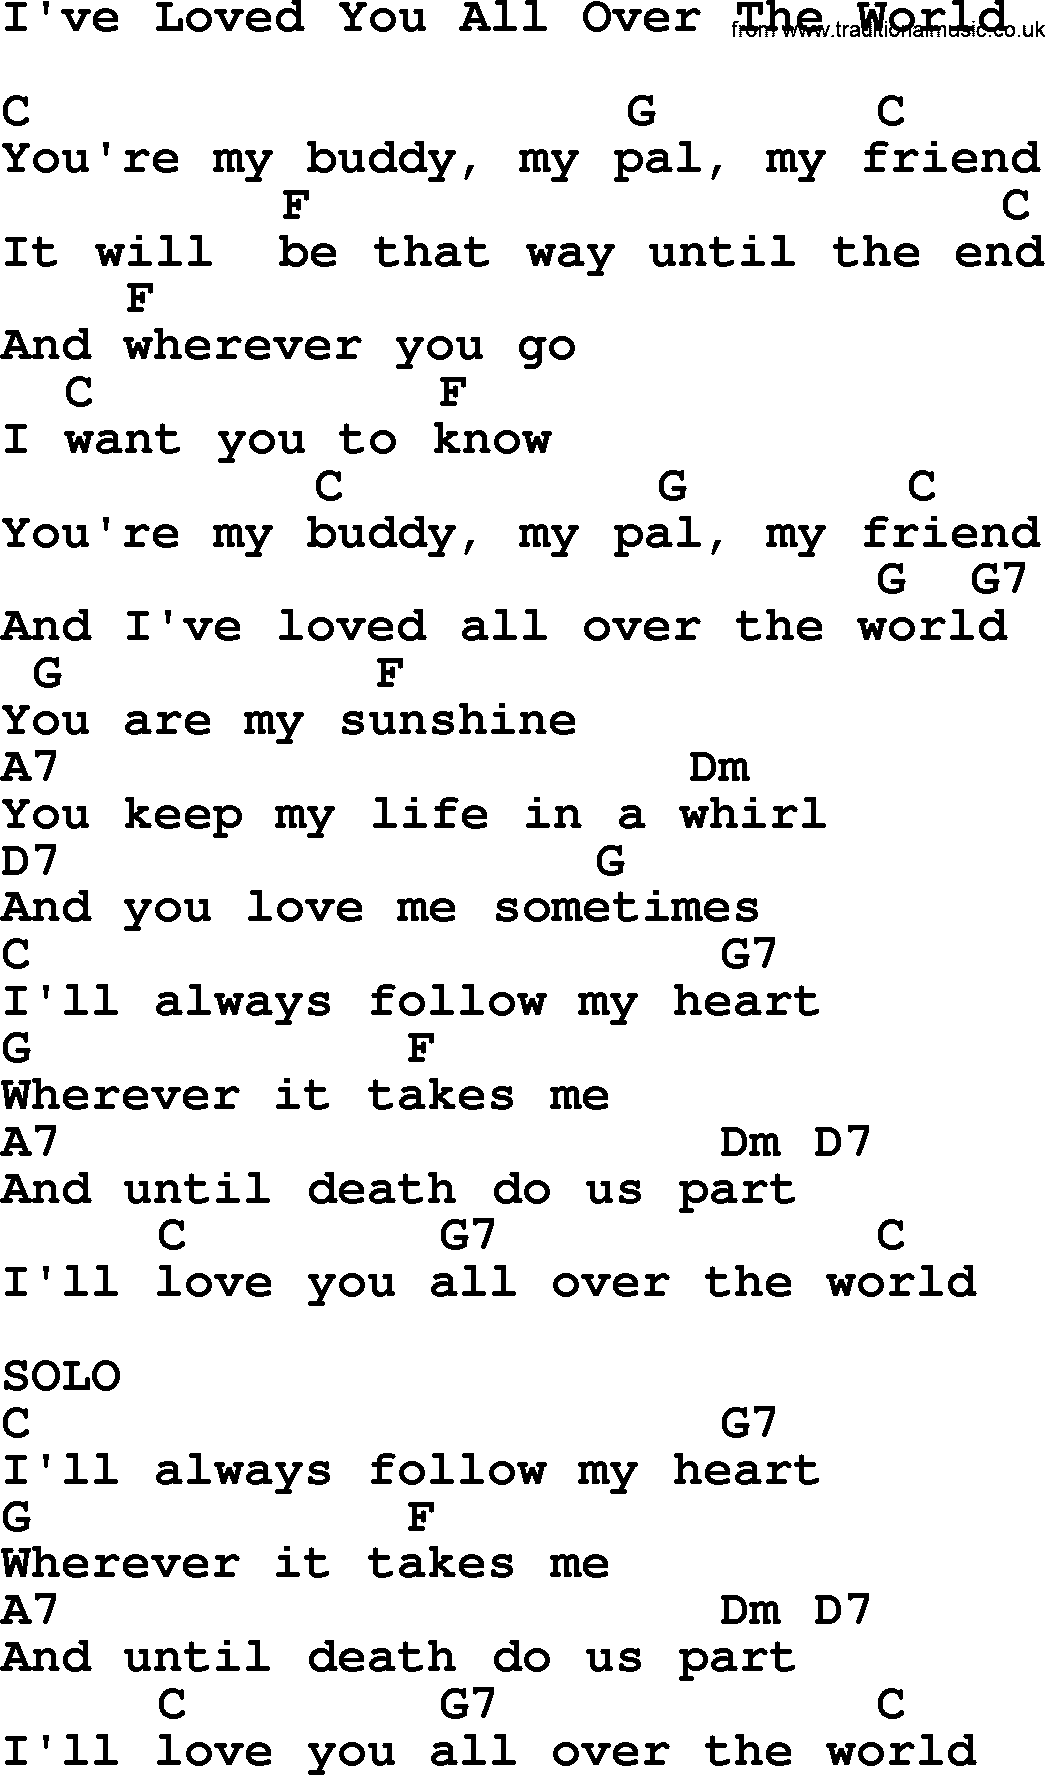 Willie Nelson song: I've Loved You All Over The World, lyrics and chords